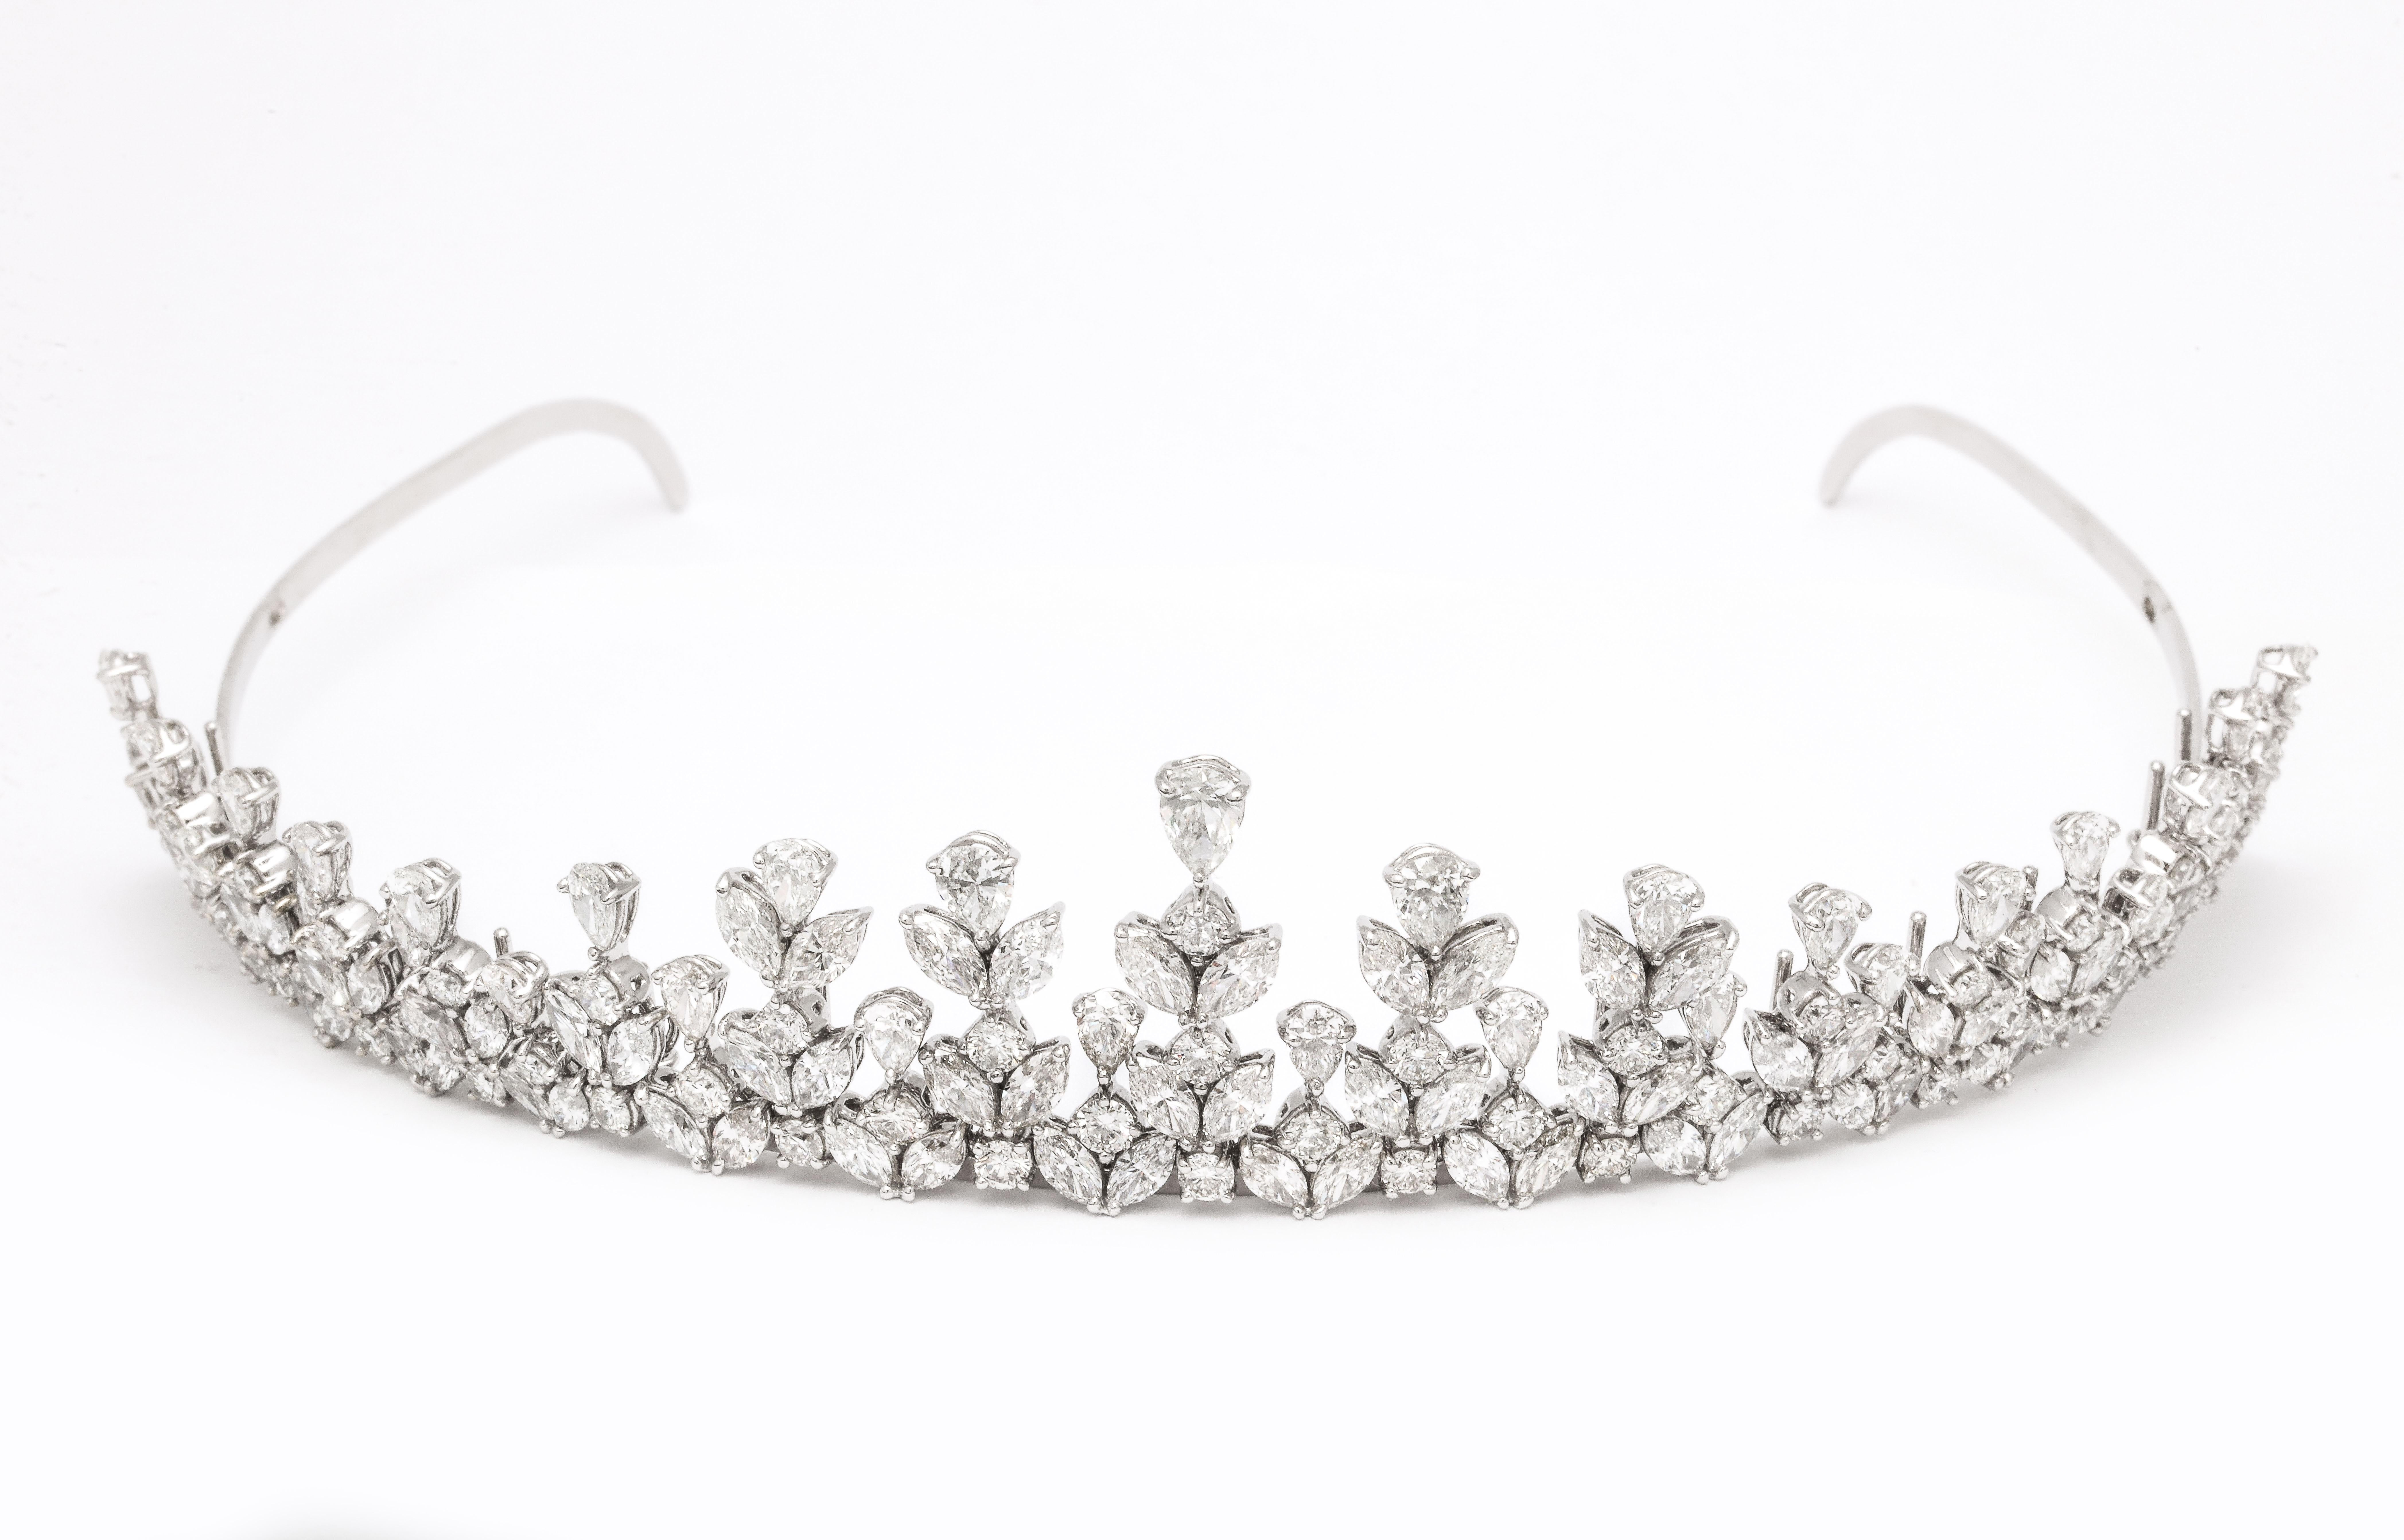 
A MASTERPIECE! 

46.75 carats of white pear, marquise and round brilliant cut diamonds set in 18k white gold. 

The piece can be worn as a necklace and easily converted into a tiara. 

The center of the tiara measures 1.20 inches high. 

The